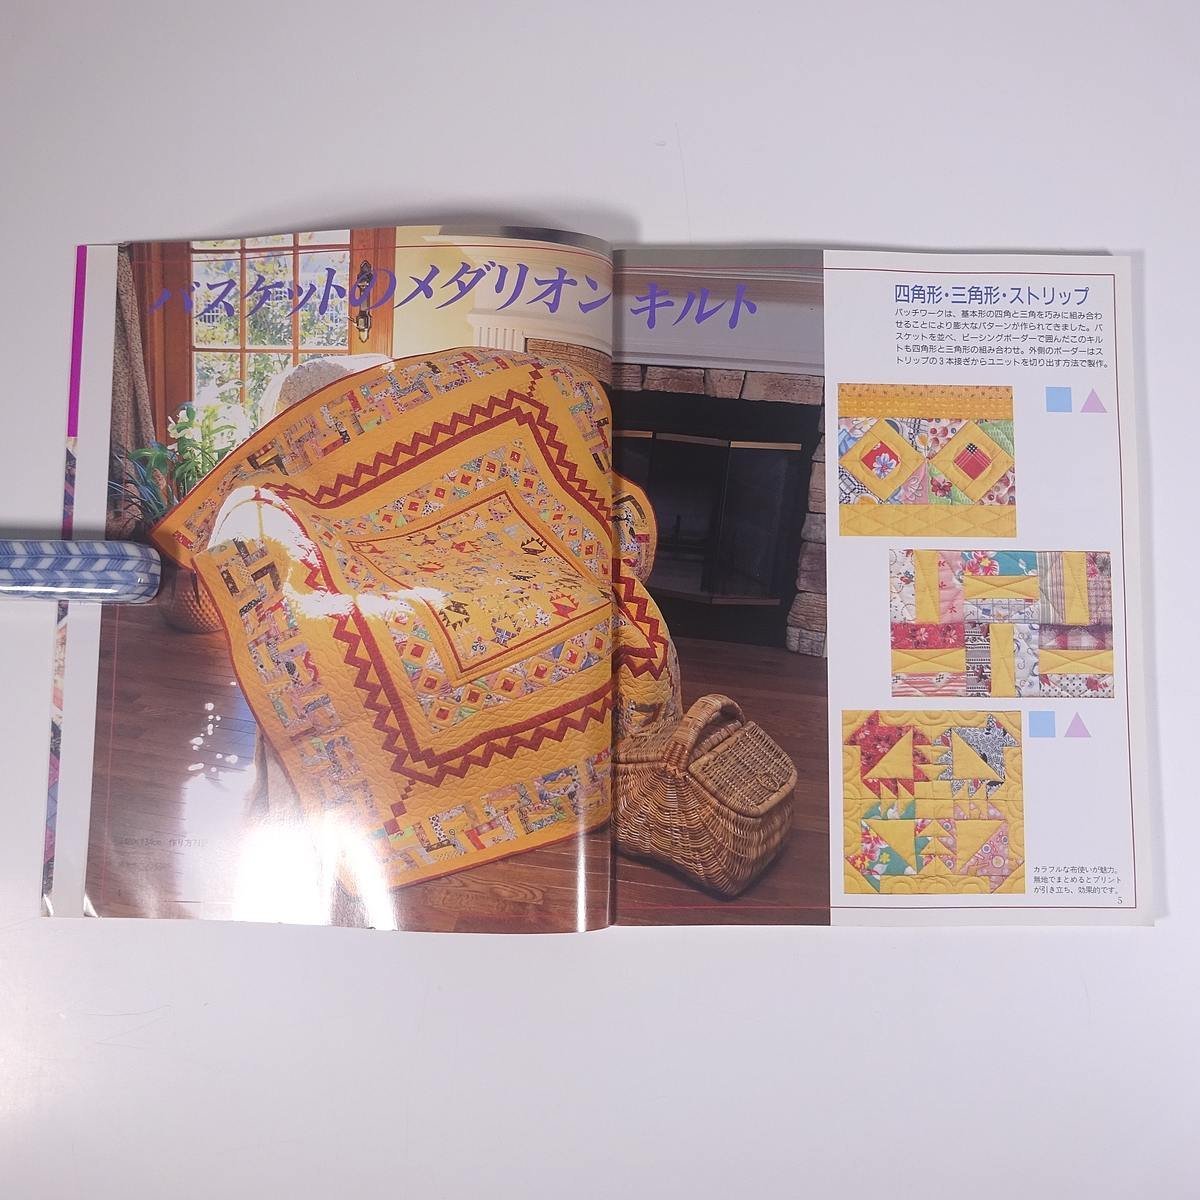  sewing machine ... patchwork * quilt pi-sing compilation lesson series patchwork communication company 1999 large book@ handicrafts sewing dressmaking patchwork 